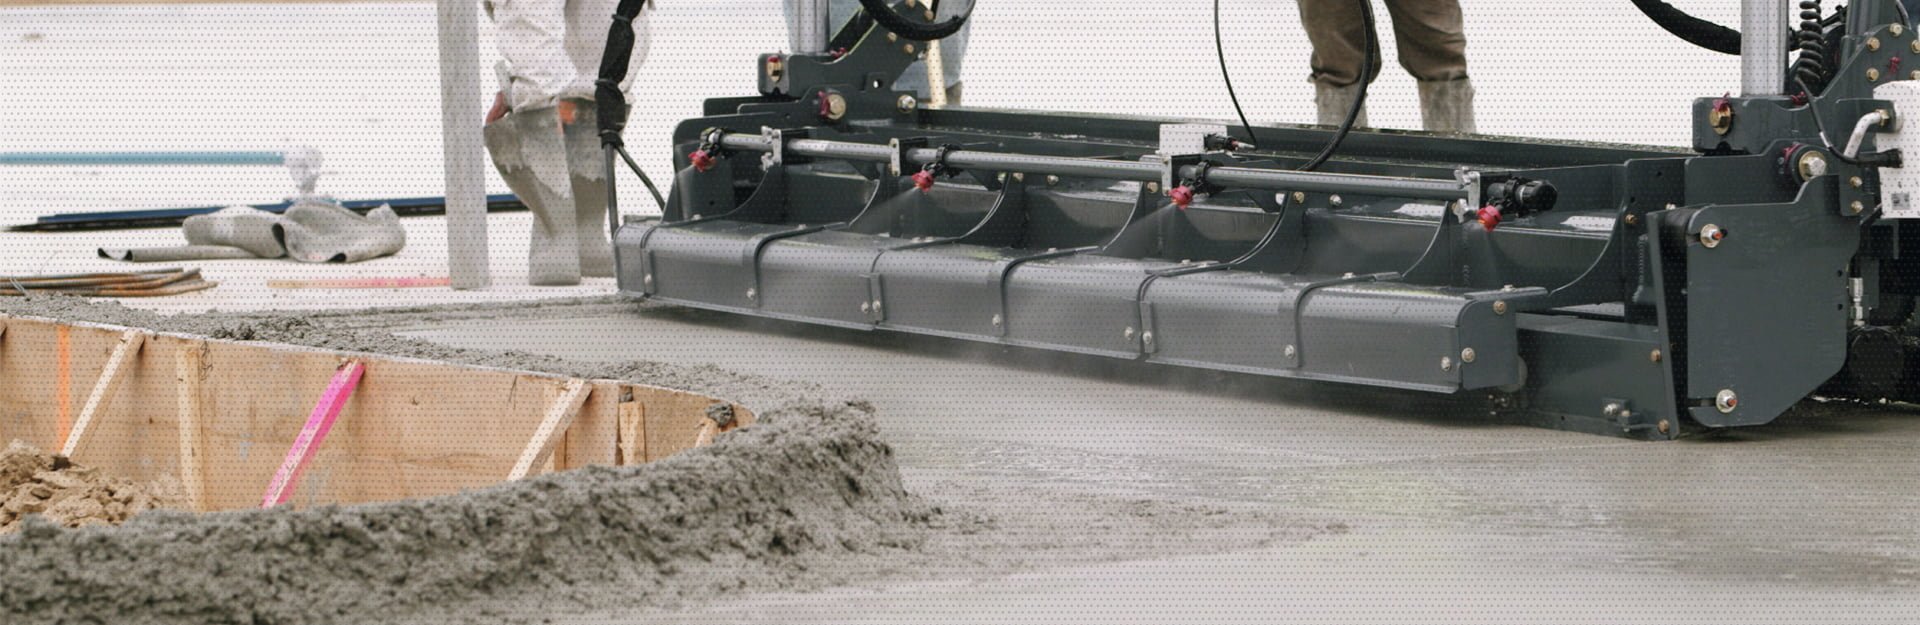 Using Laser Screed technology, the AM Contracting crew creates a flawless concrete foundation structure as the employees analyze the process close up.